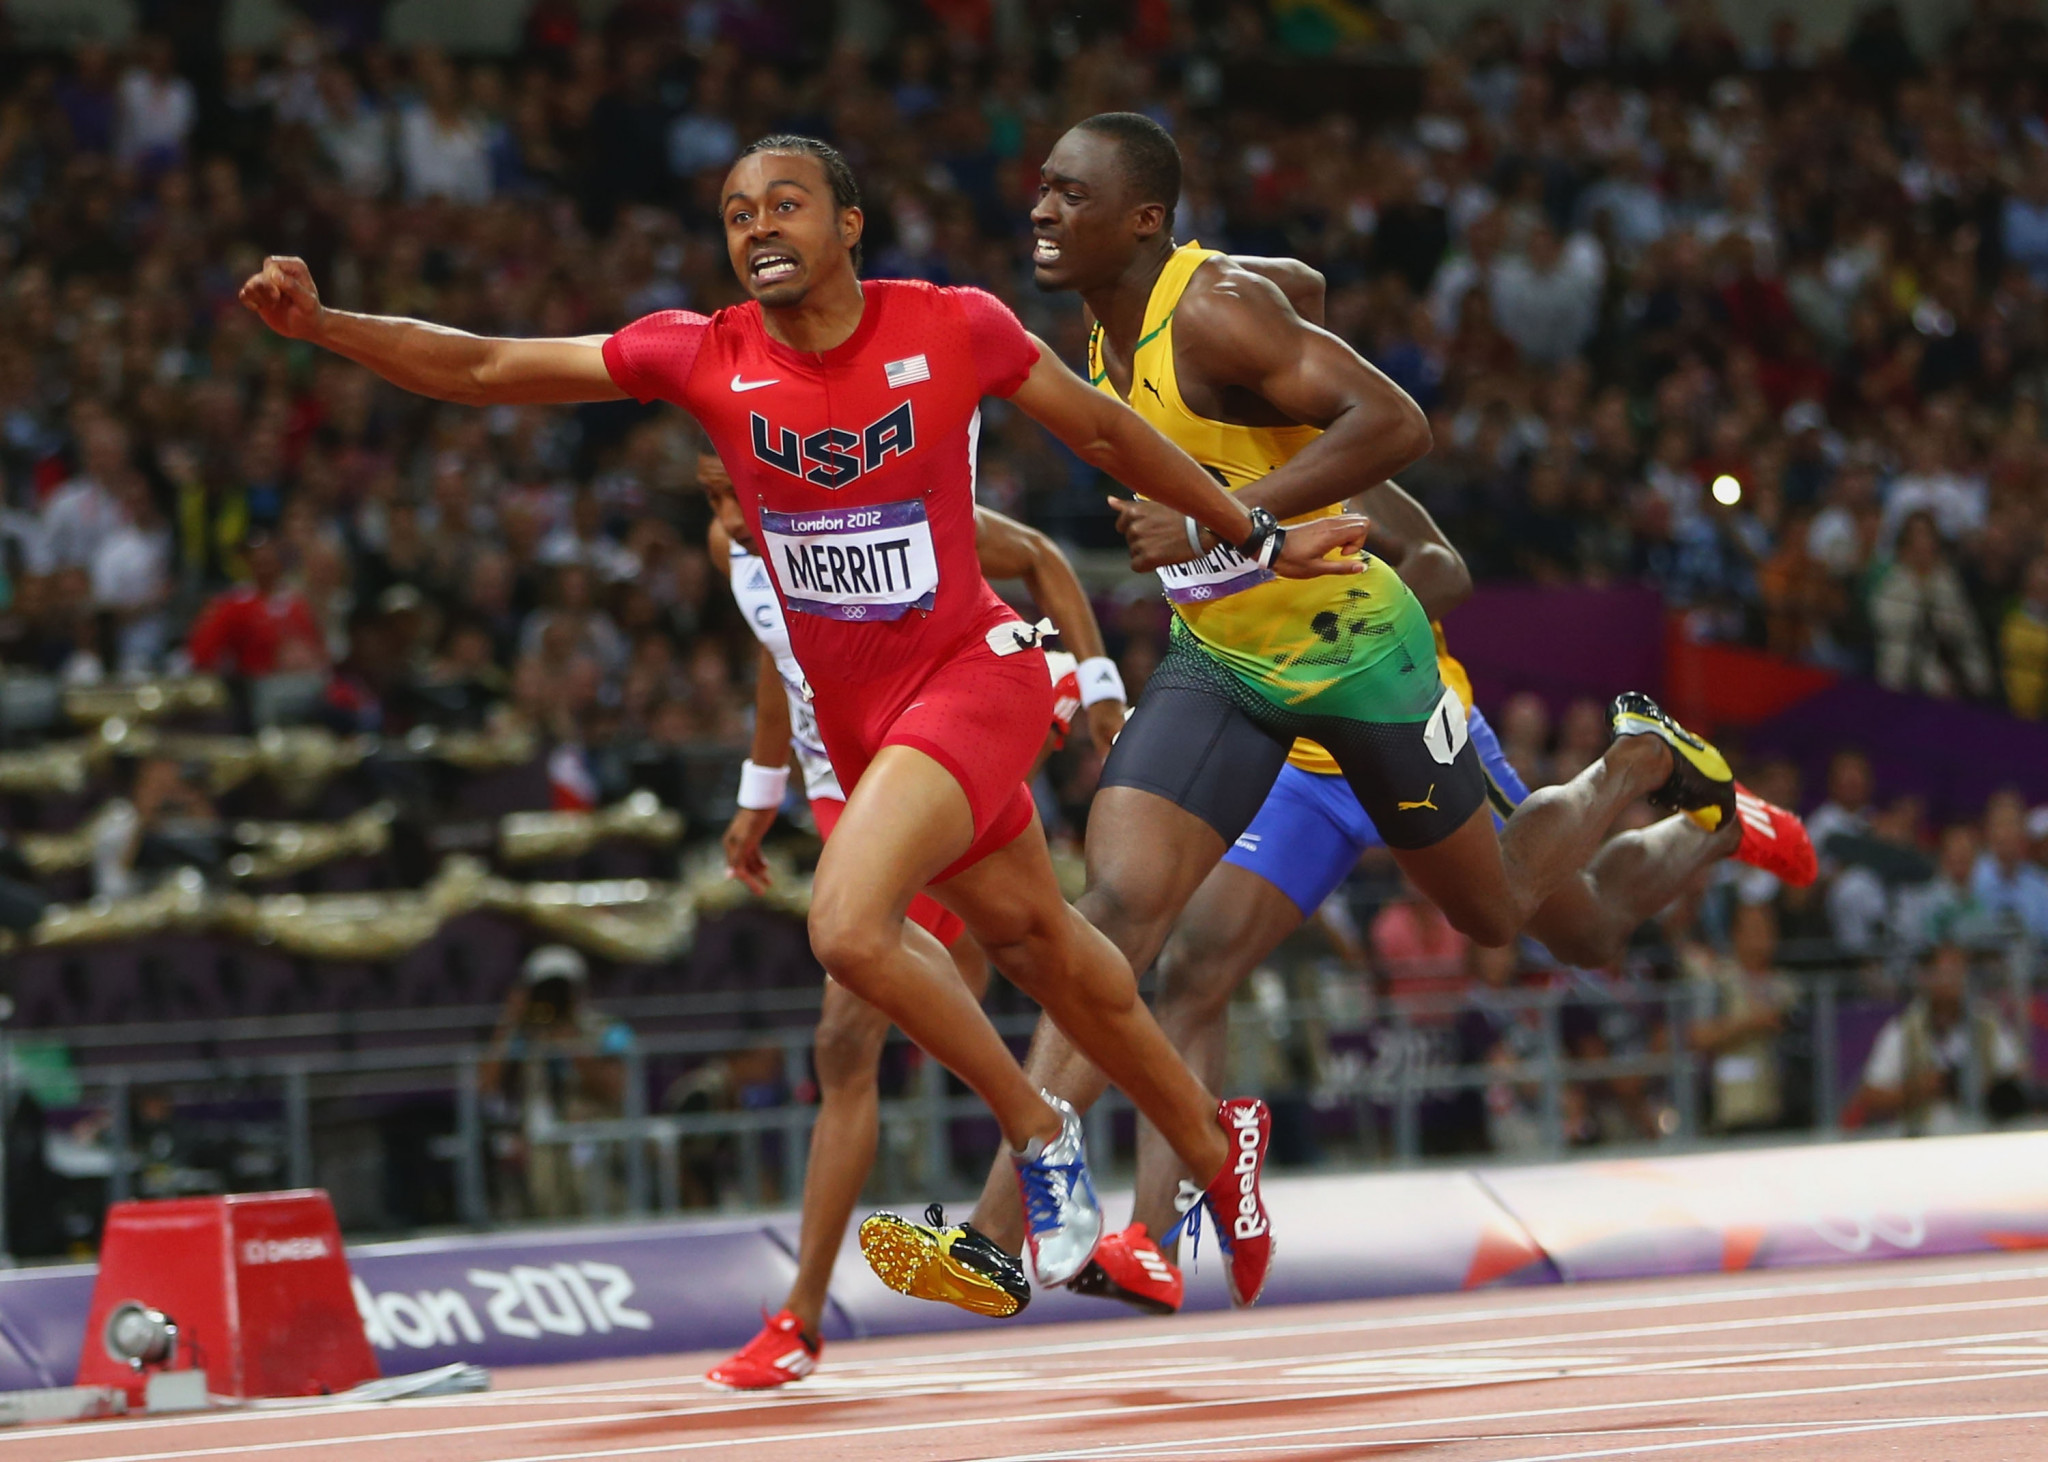 Aries Merritt won gold in the men's 110m hurdles at London 2012 and is also the current world record holder in the event ©Getty Images